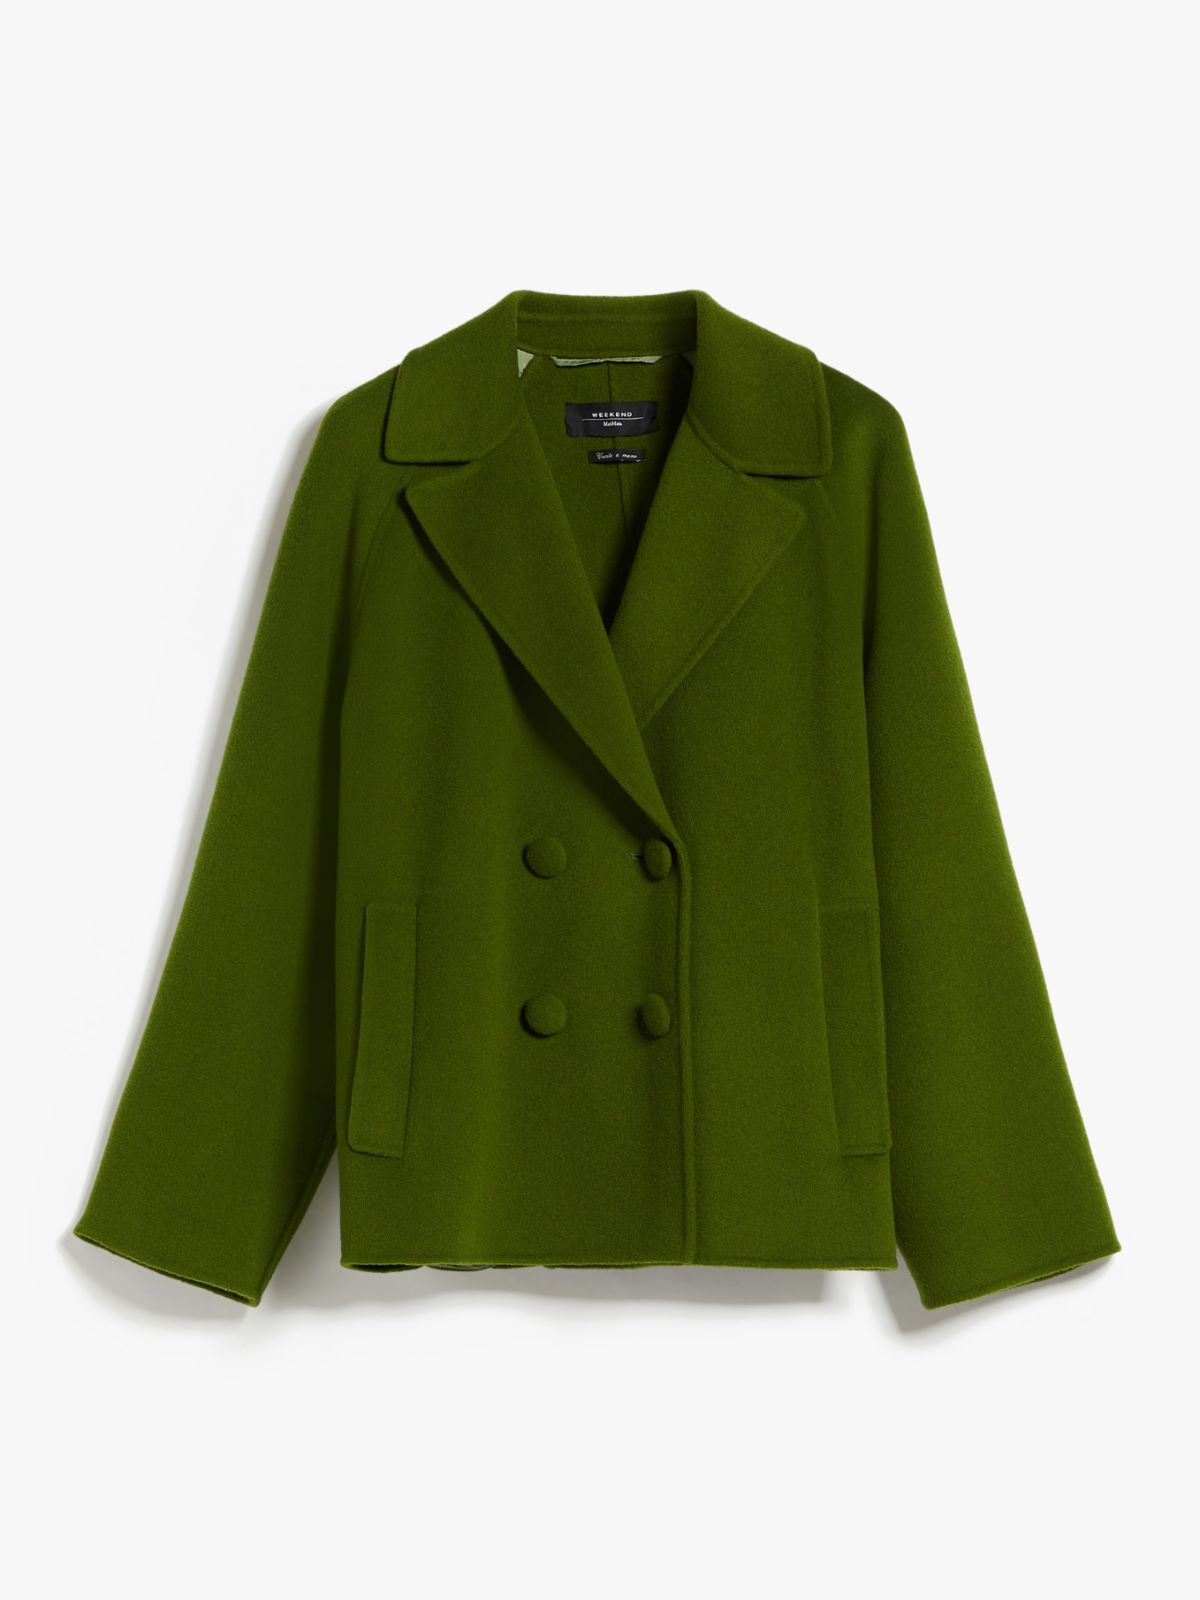 green double-breasted jacket